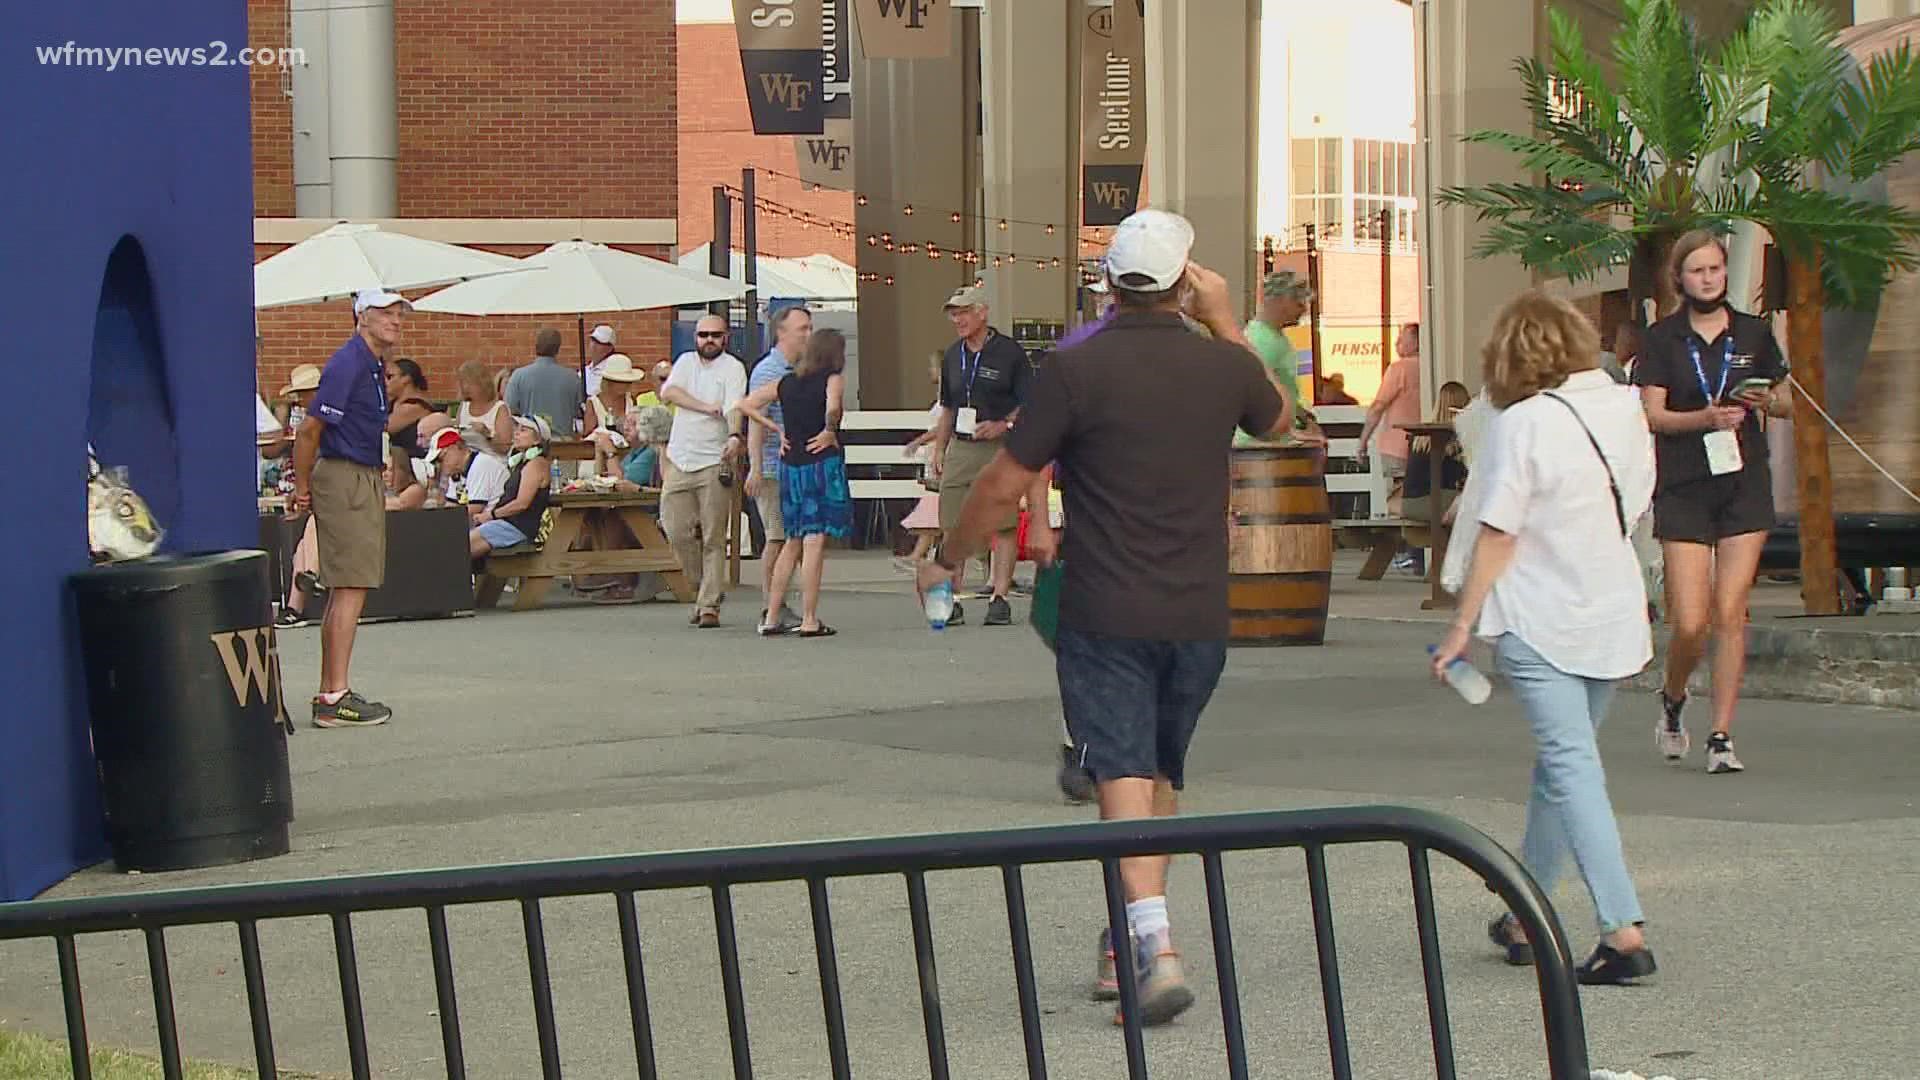 Winston-Salem Open organizers say they are seeing record crowd numbers. They say fans are practicing safe COVID-19 measures such as wearing masks and distancing.